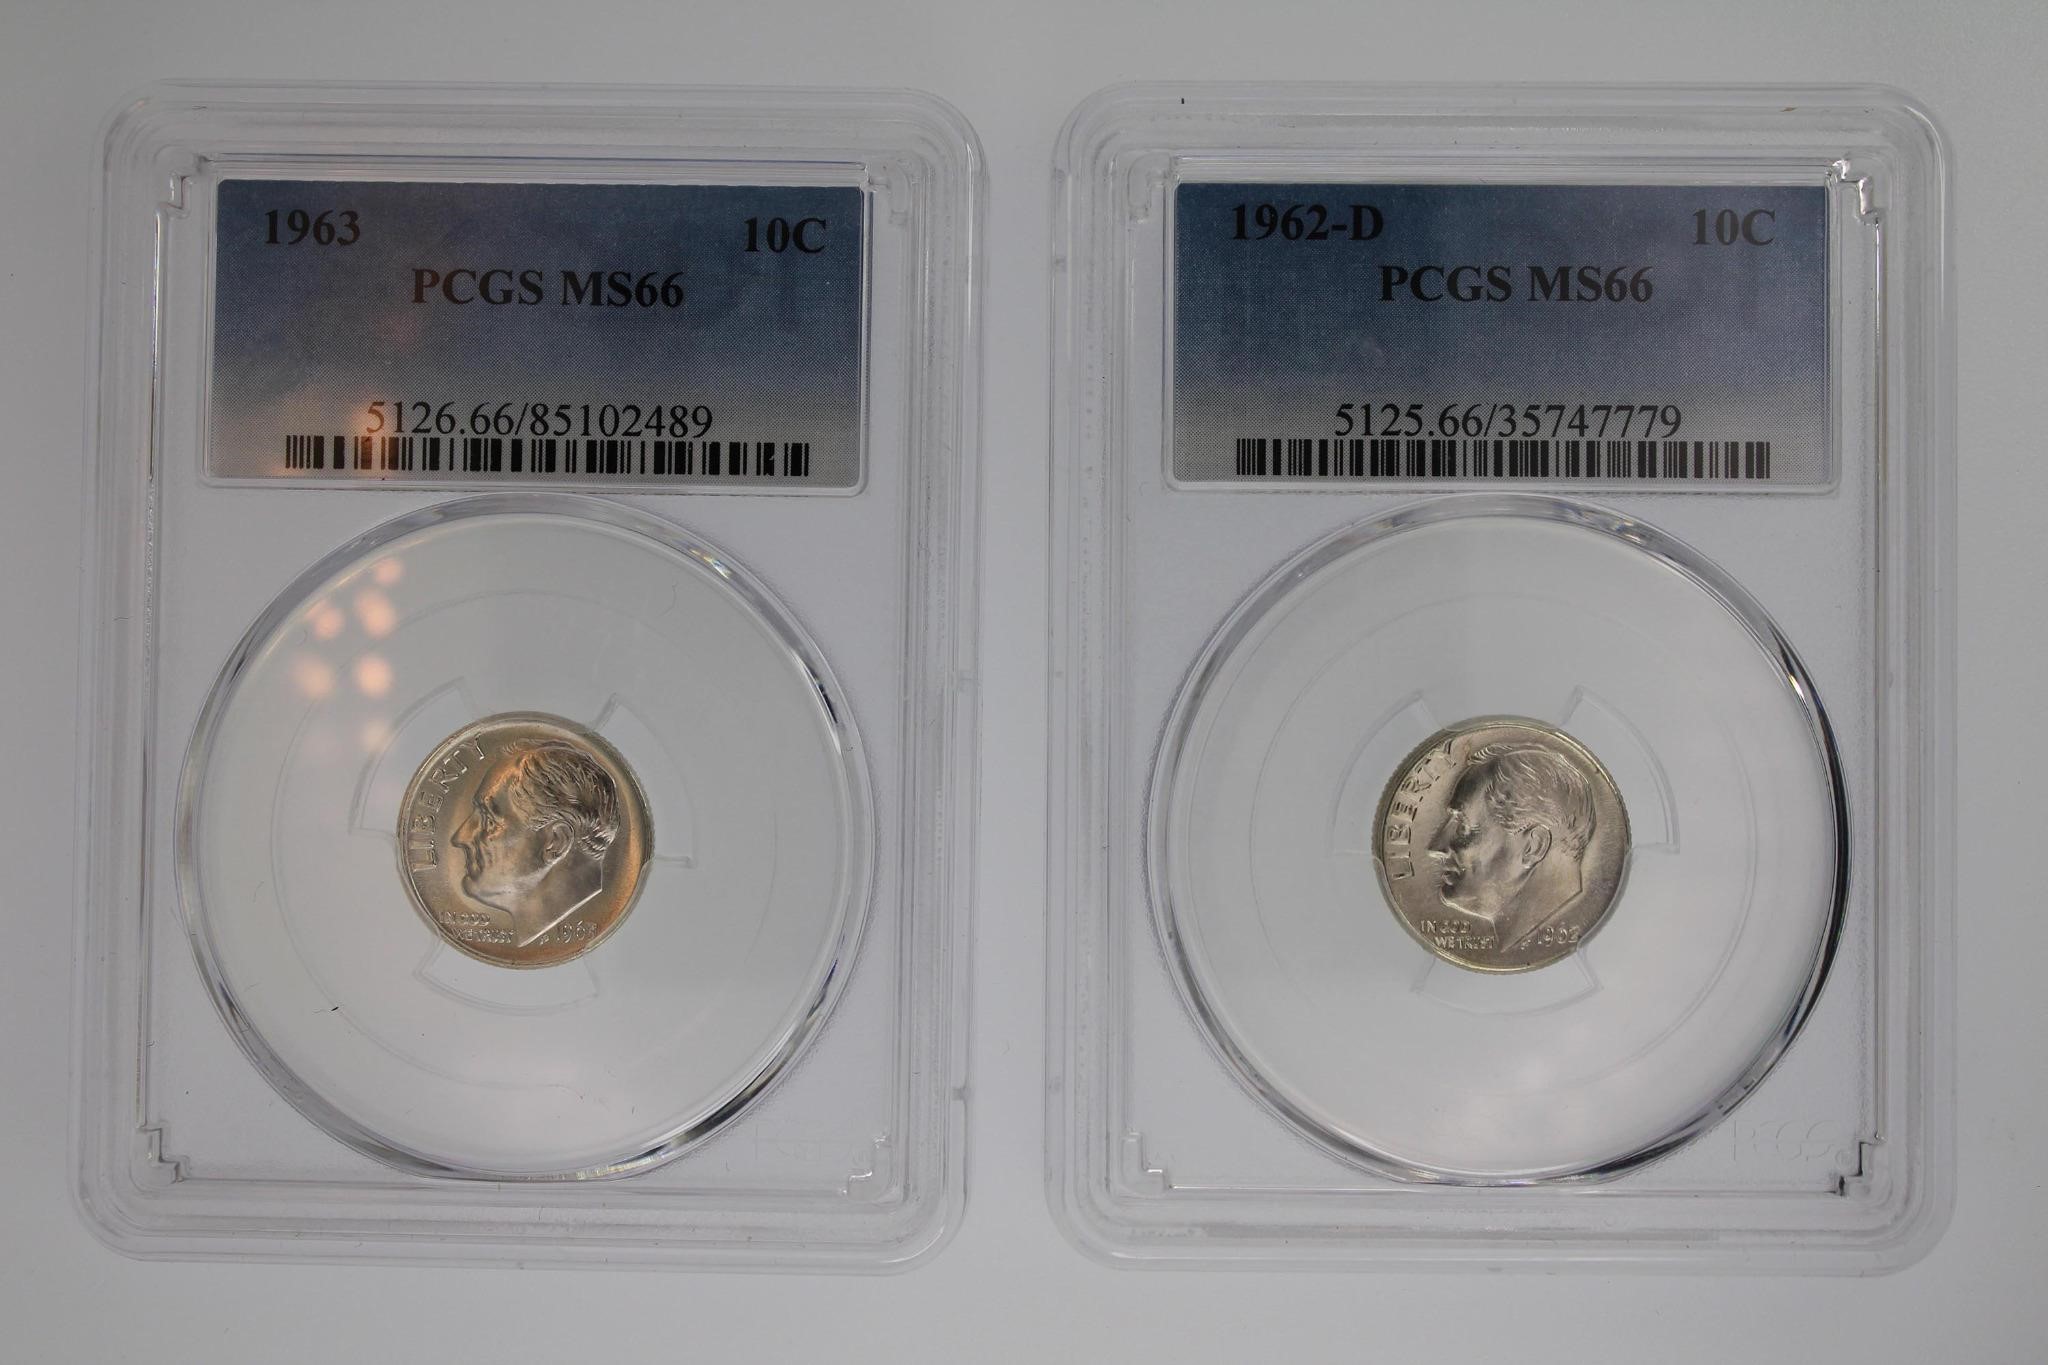 1962-D, 1963 Dime PCGS MS66 Pack of 2